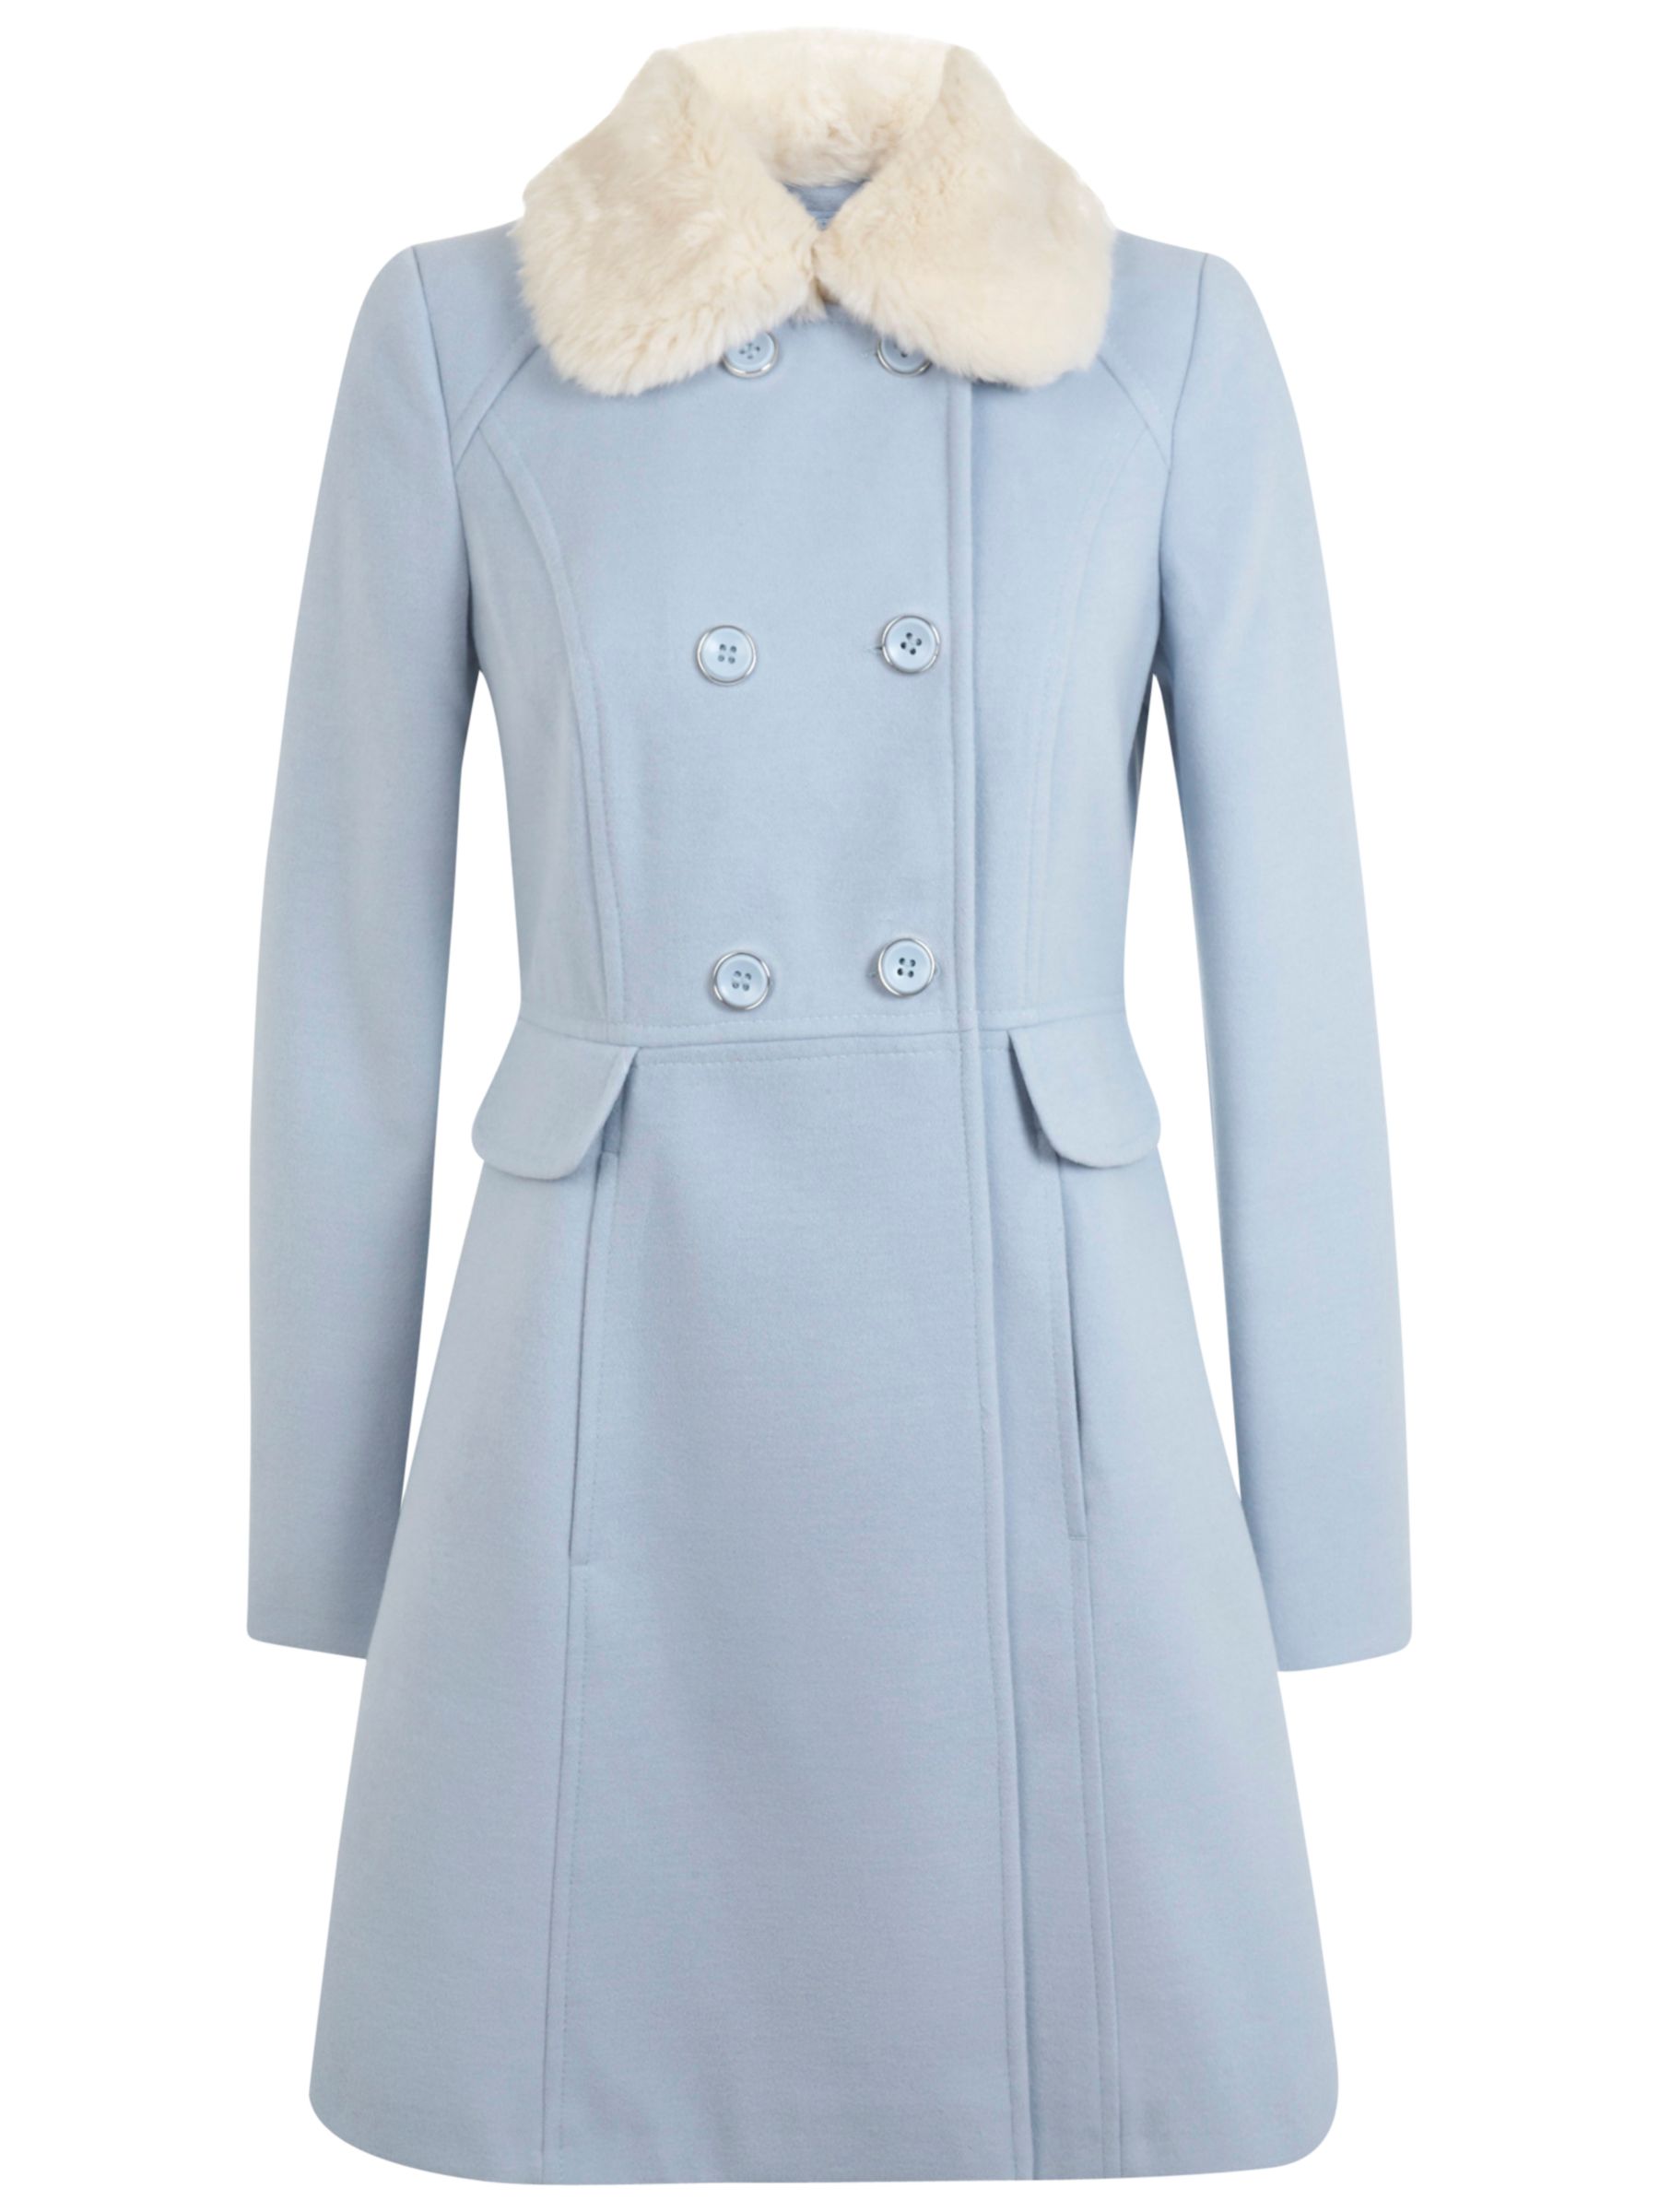 Miss Selfridge Double Breasted Skirted Coat, Pale Blue